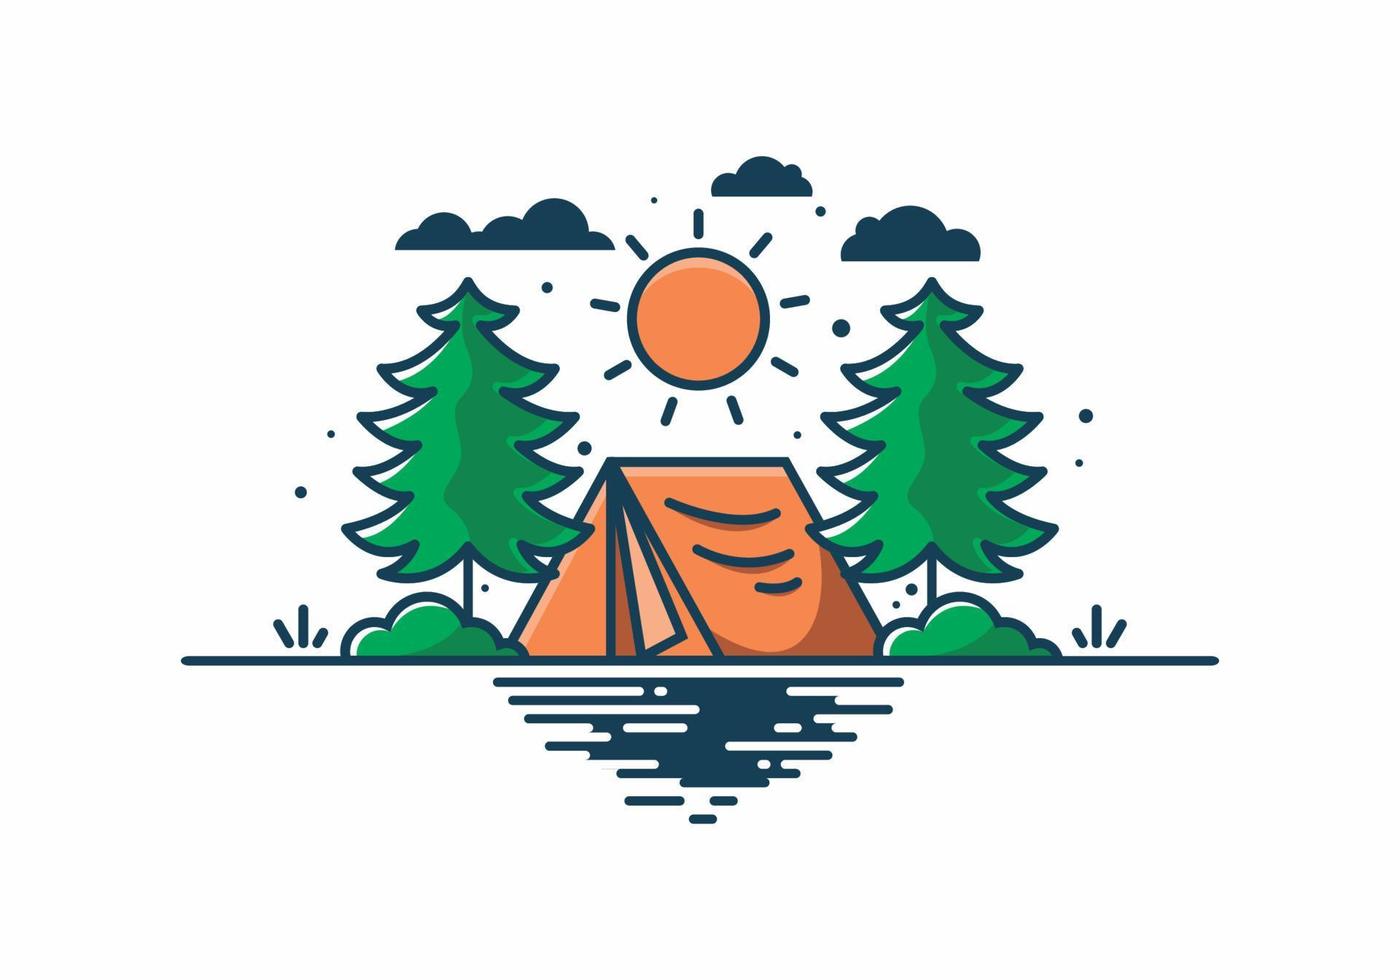 Fun camping with tent illustration vector